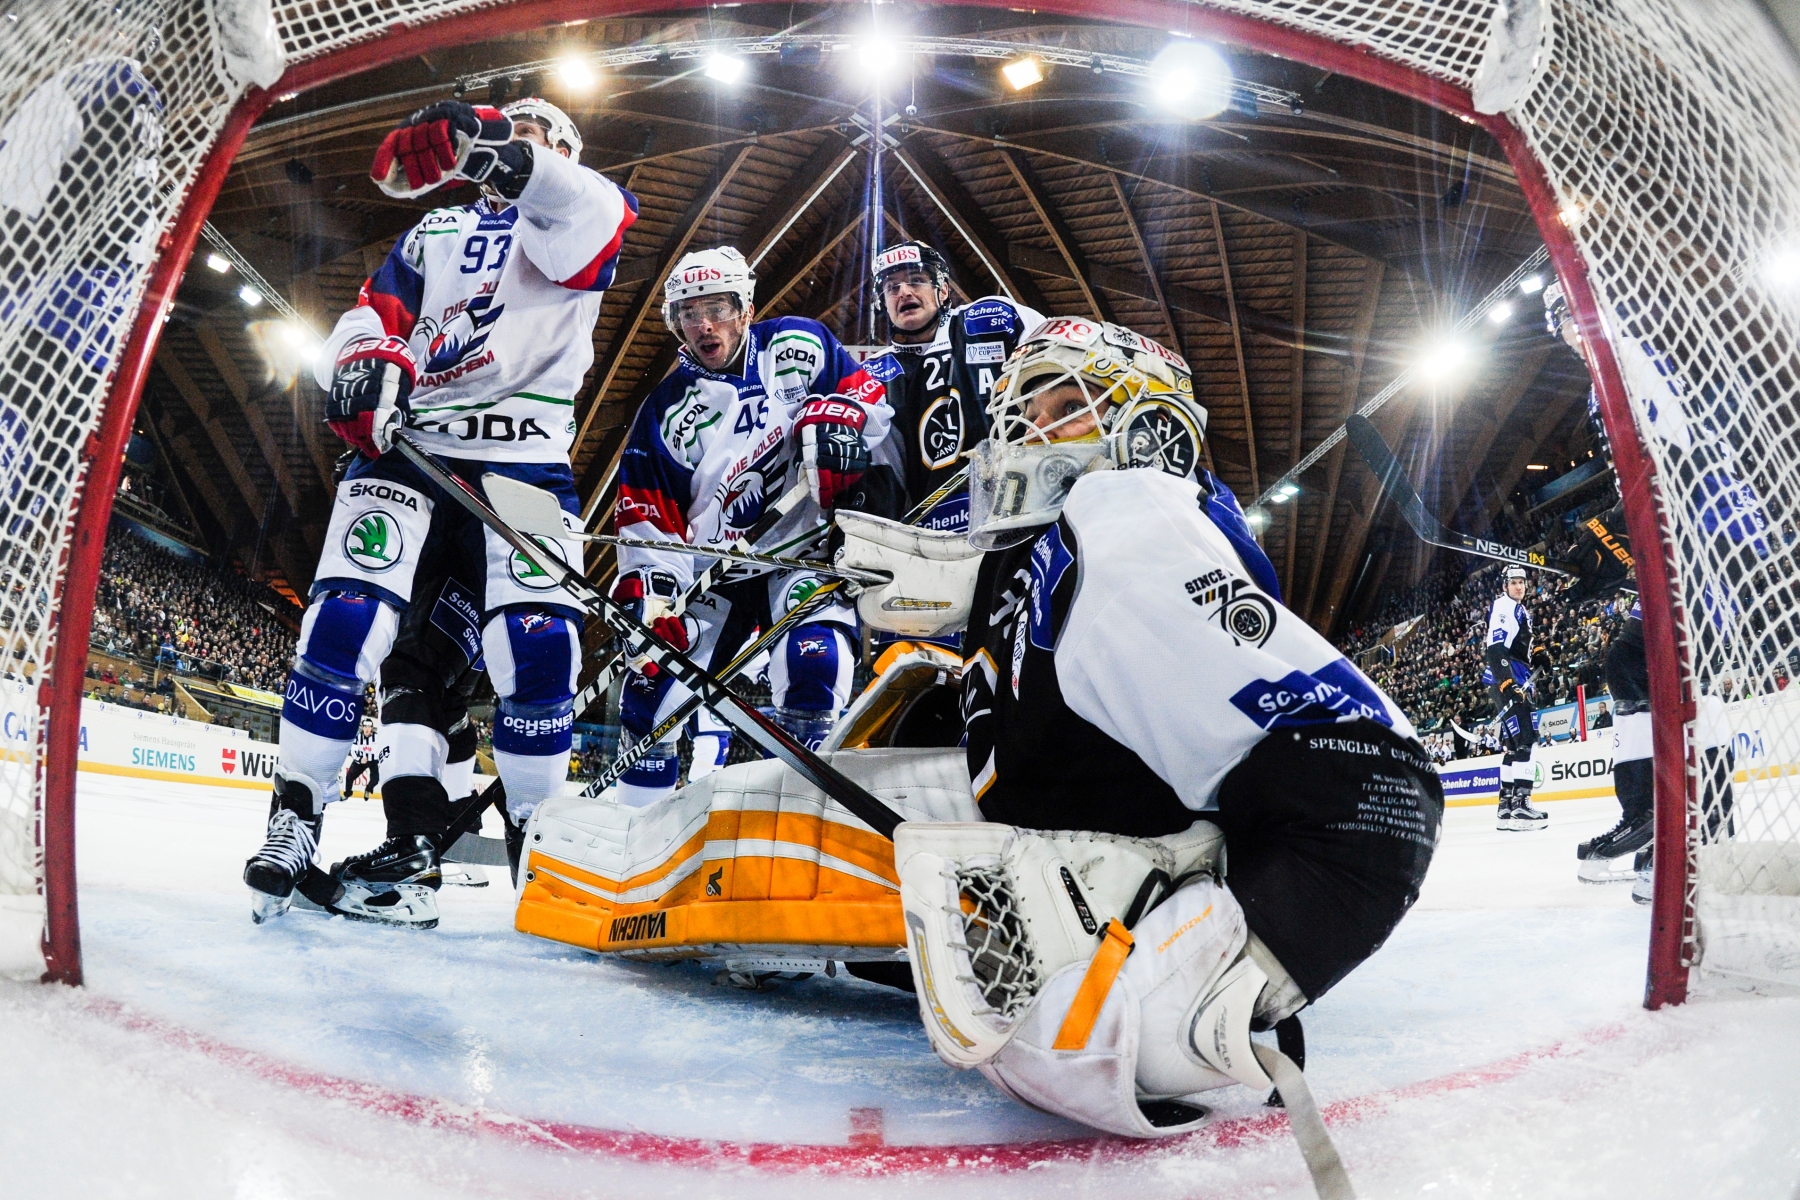 Lugano's goalkeeper Elvis Merzlikins, right, fights for the puck with Mannheim's Brent Raedeke and Jon Rheualt, from left, during the game between Switzerland's HC Lugano and Germany's Adler Mannheim, at the 89th Spengler Cup ice hockey tournament in Davos, Switzerland, on Saturday, December 26, 2015. (KEYSTONE/Gian Ehrenzeller) EISHOCKEY SPENGLER CUP 2015 LUGANO MANNHEIM